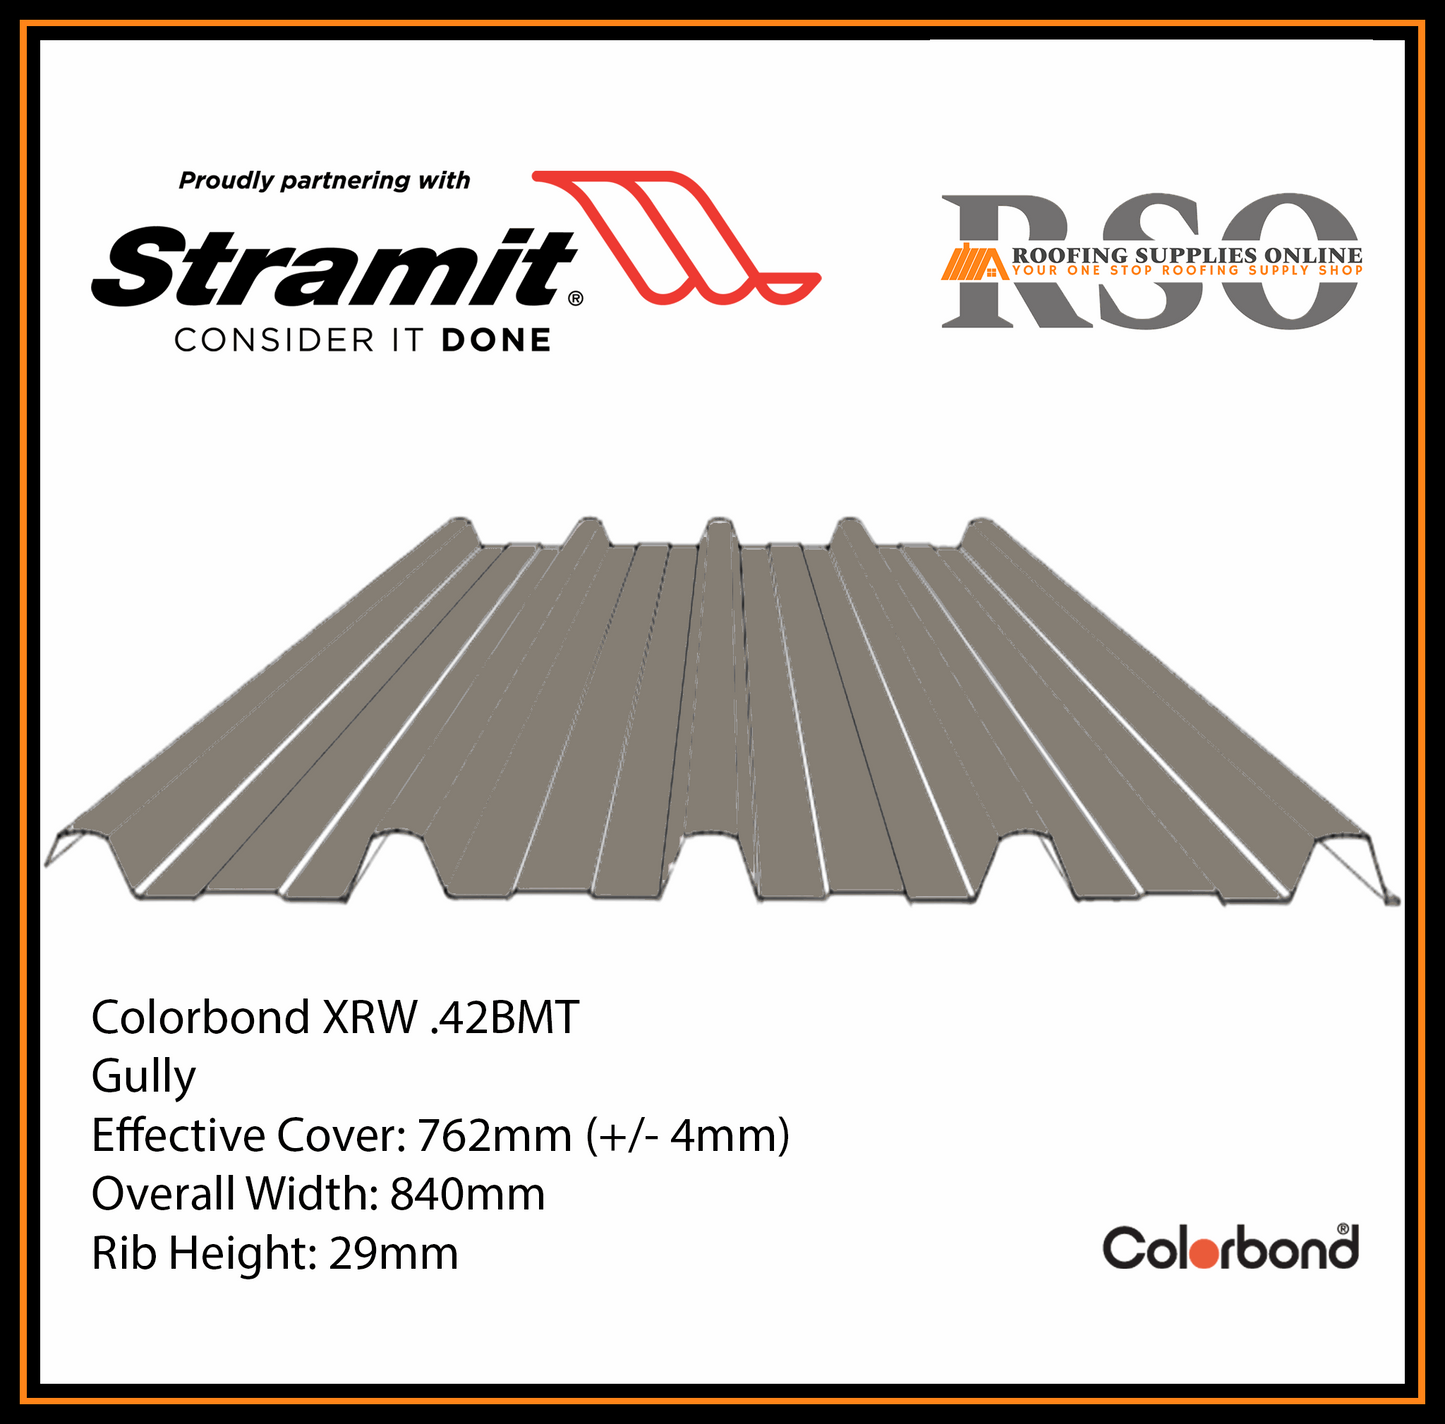 This is an illustration of a Monoclad profile roof sheet which is also known as 5 Rib or Trimdek profile. This Roof sheet's colour is called Gully.